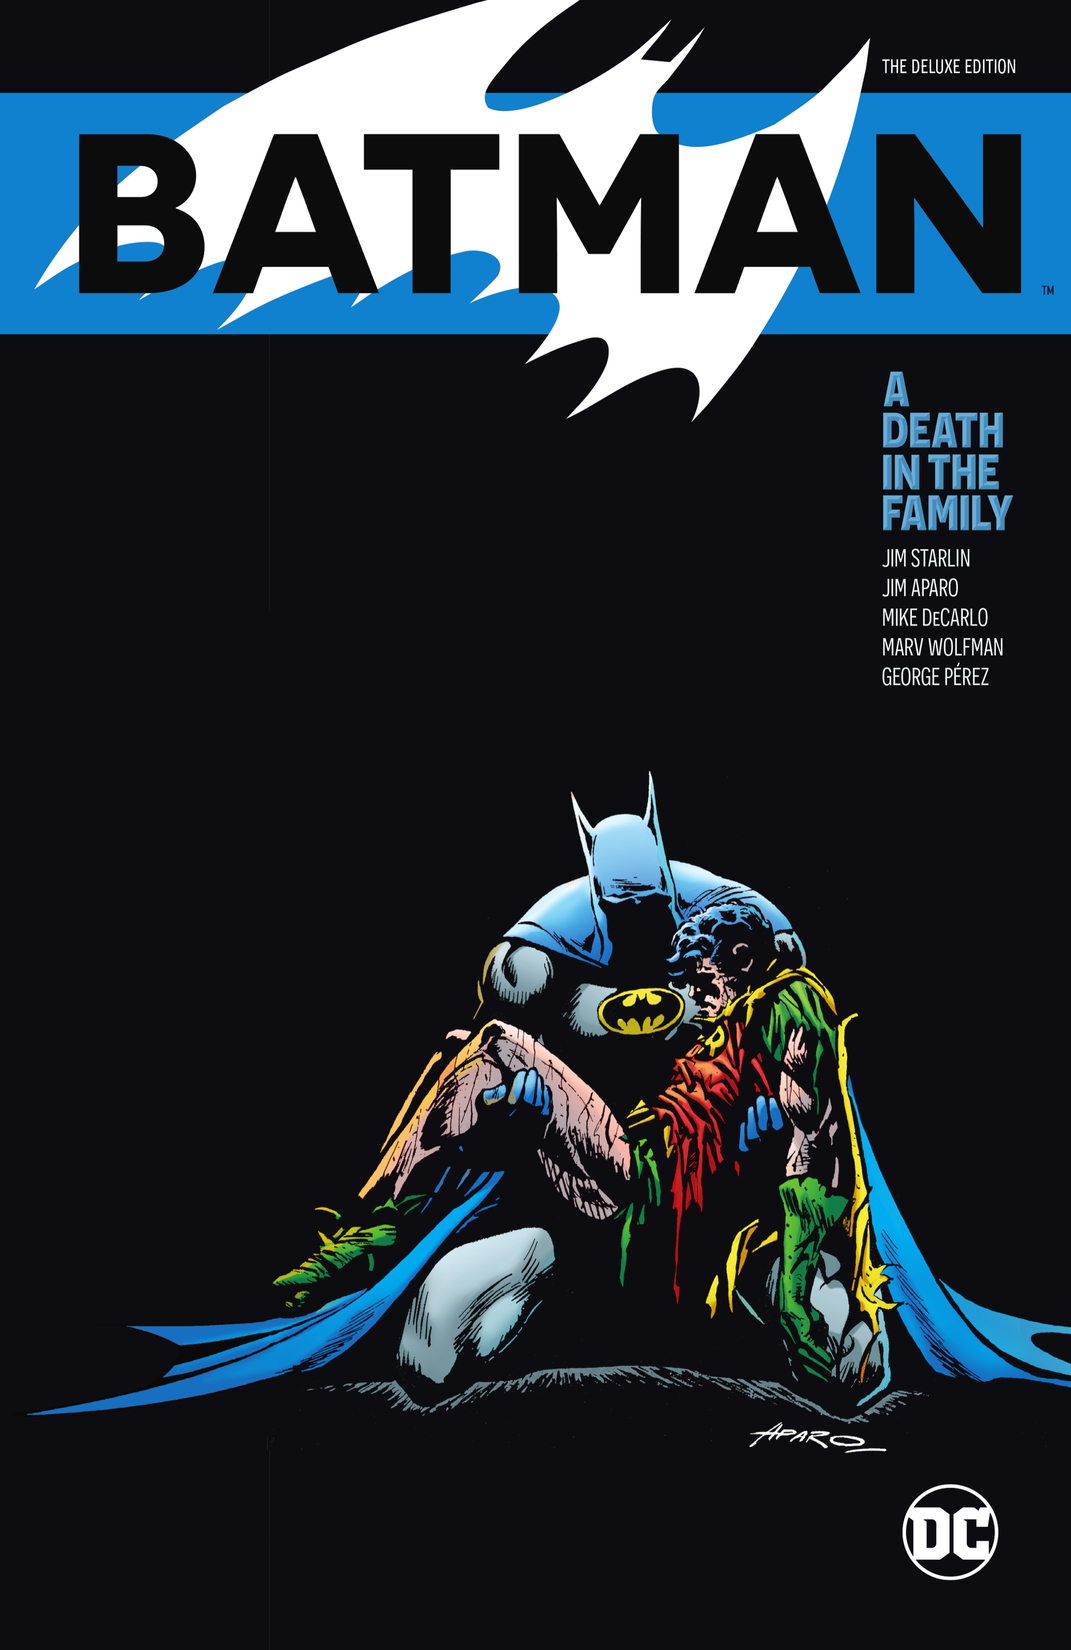 Batman: A Death in the Family The Deluxe Edition preview images